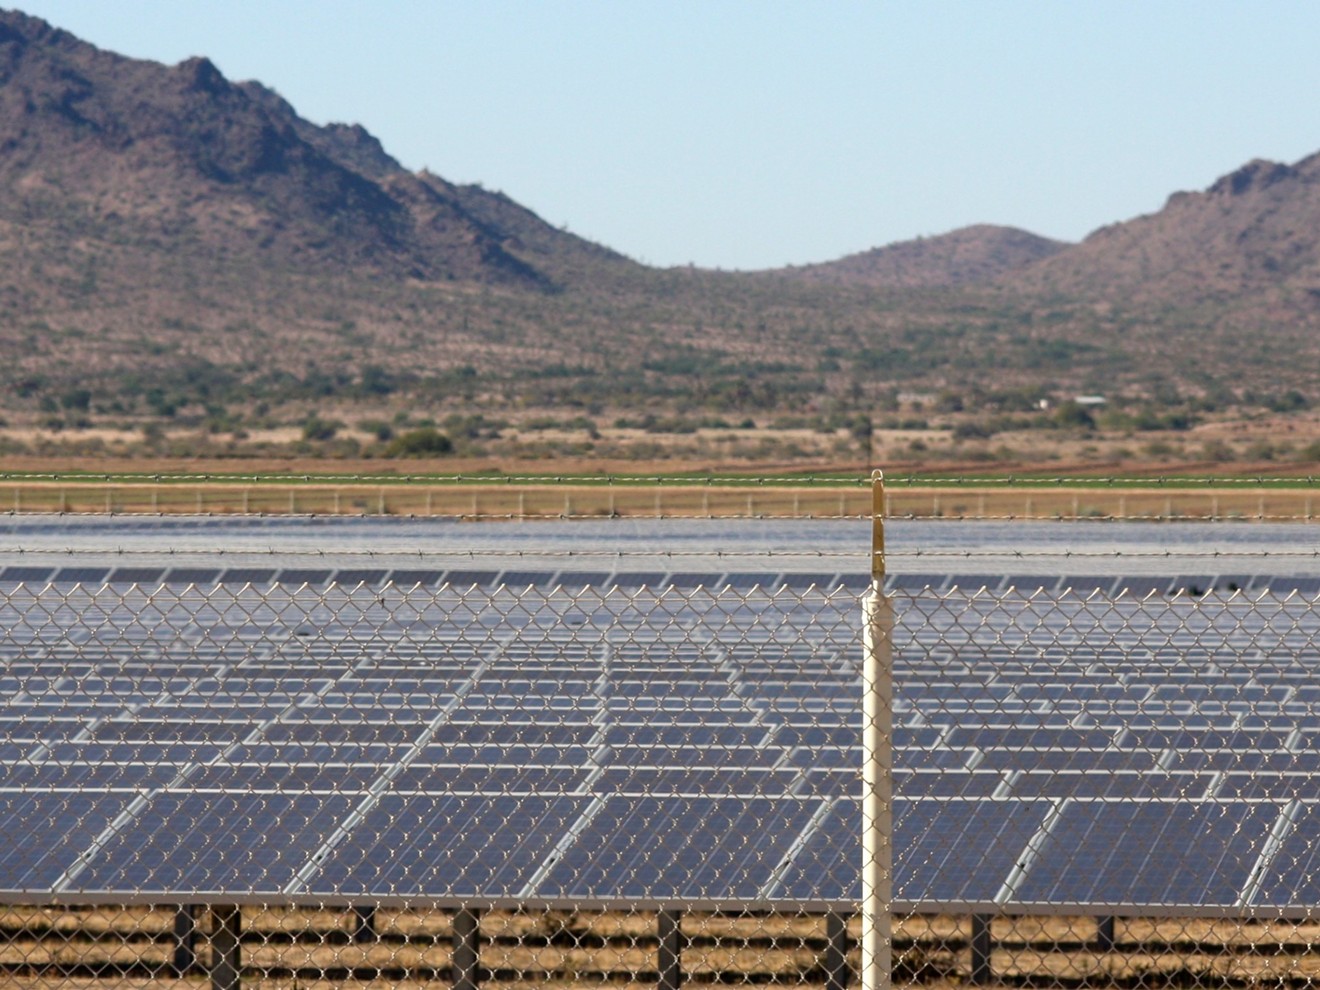 "Arizona women breathe different air and drink different water than men. Because science,” tweeted an opponent of Arizona's controversial renewable energy ballot initiative.